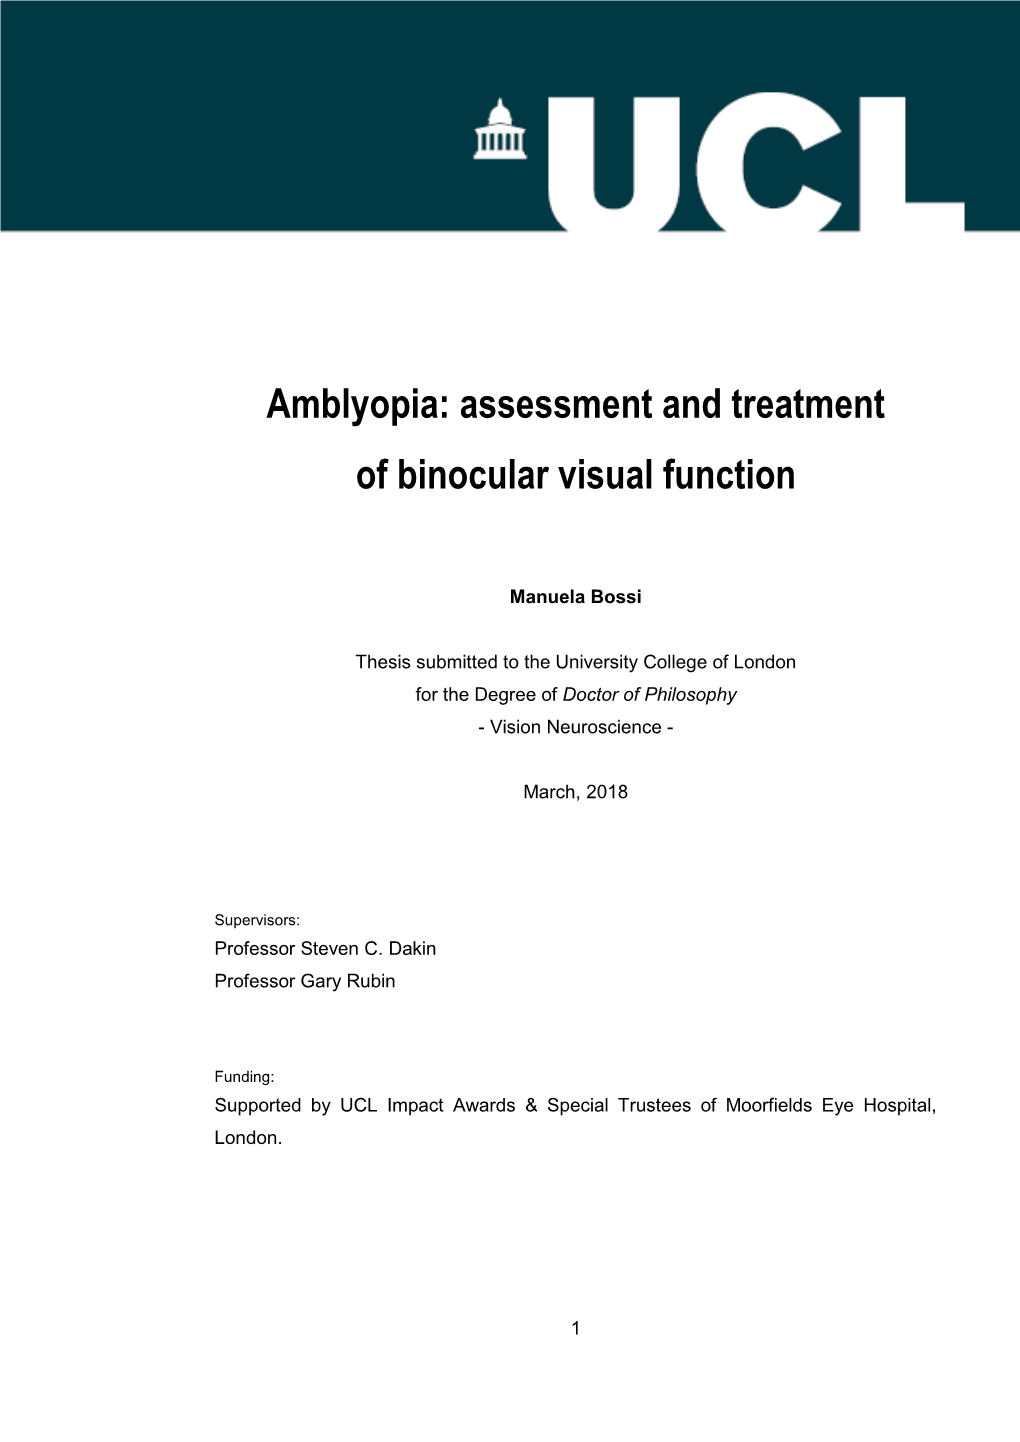 Amblyopia: Assessment and Treatment of Binocular Visual Function